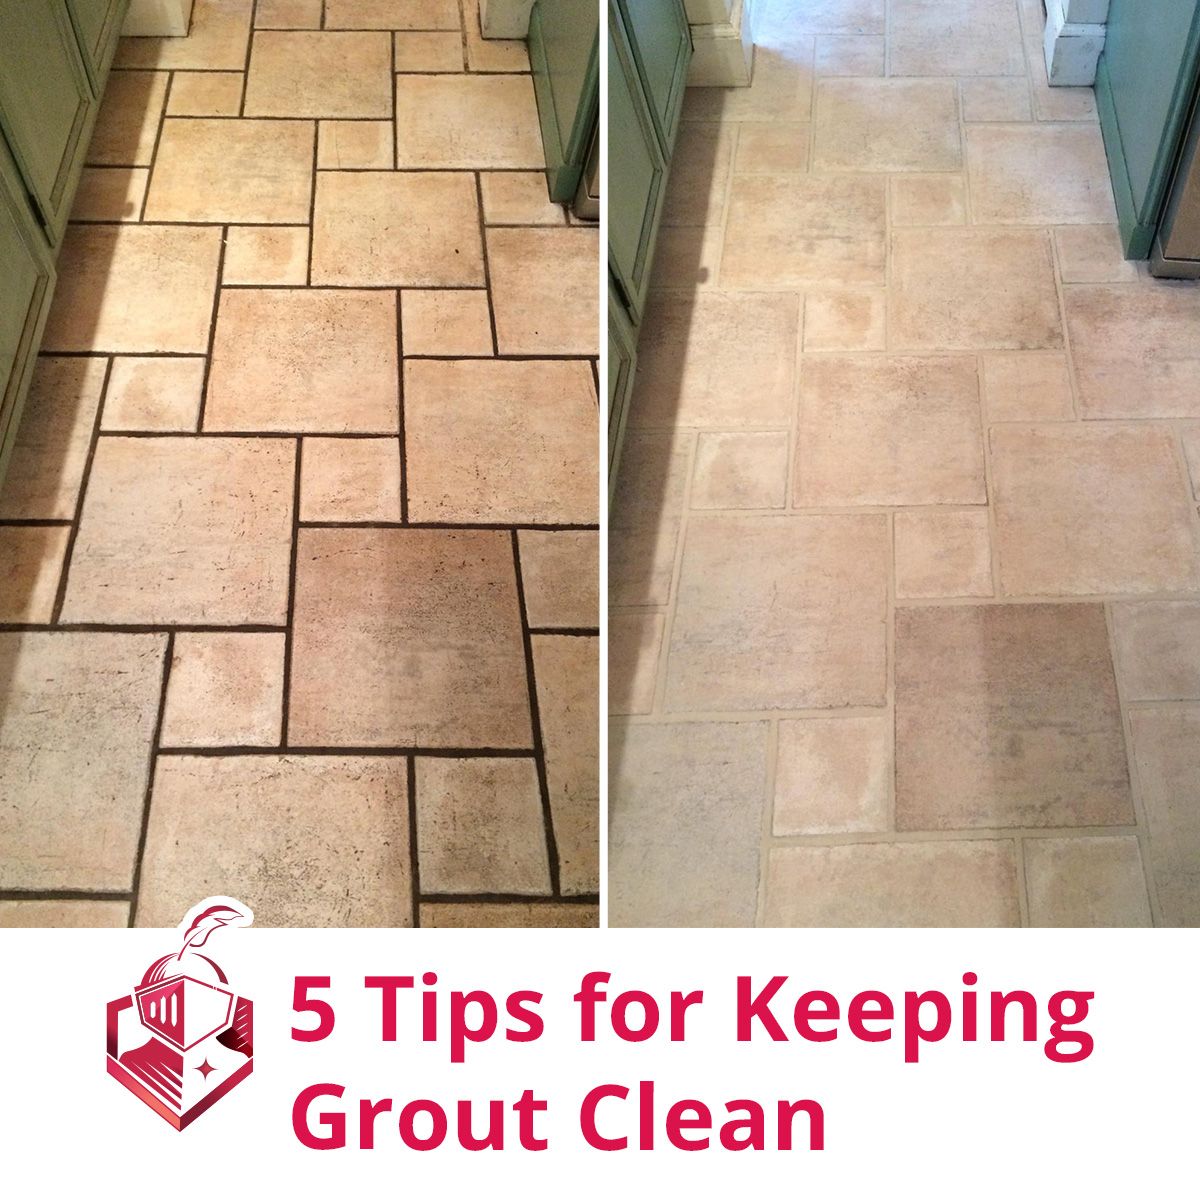 5 Tips for Keeping Grout Clean